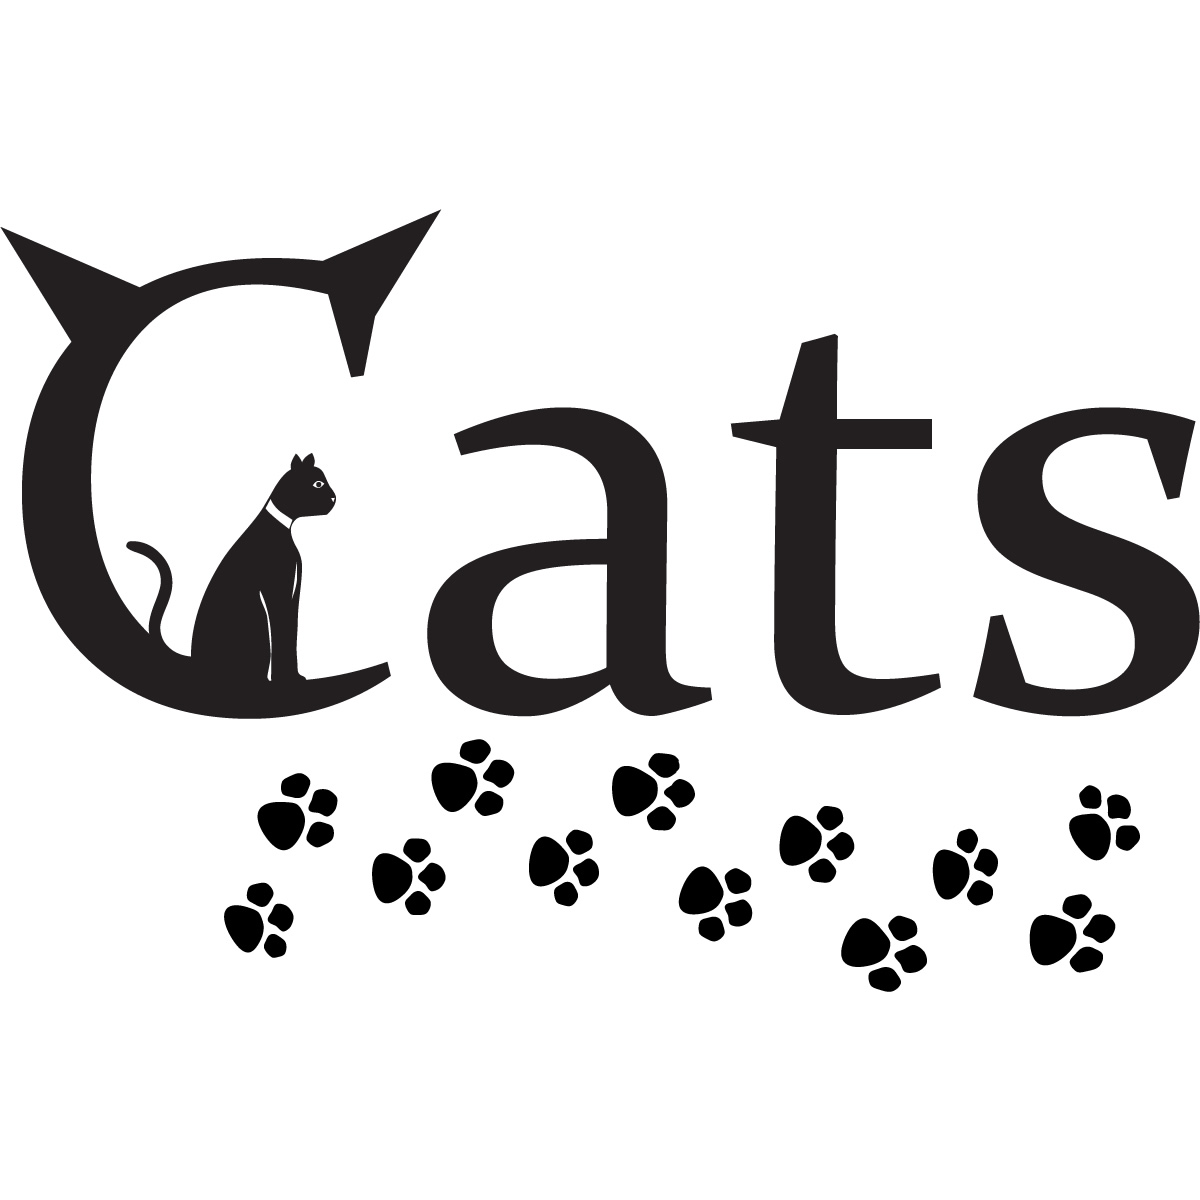 Free Picture Of Cat Paw Print, Download Free Clip Art, Free